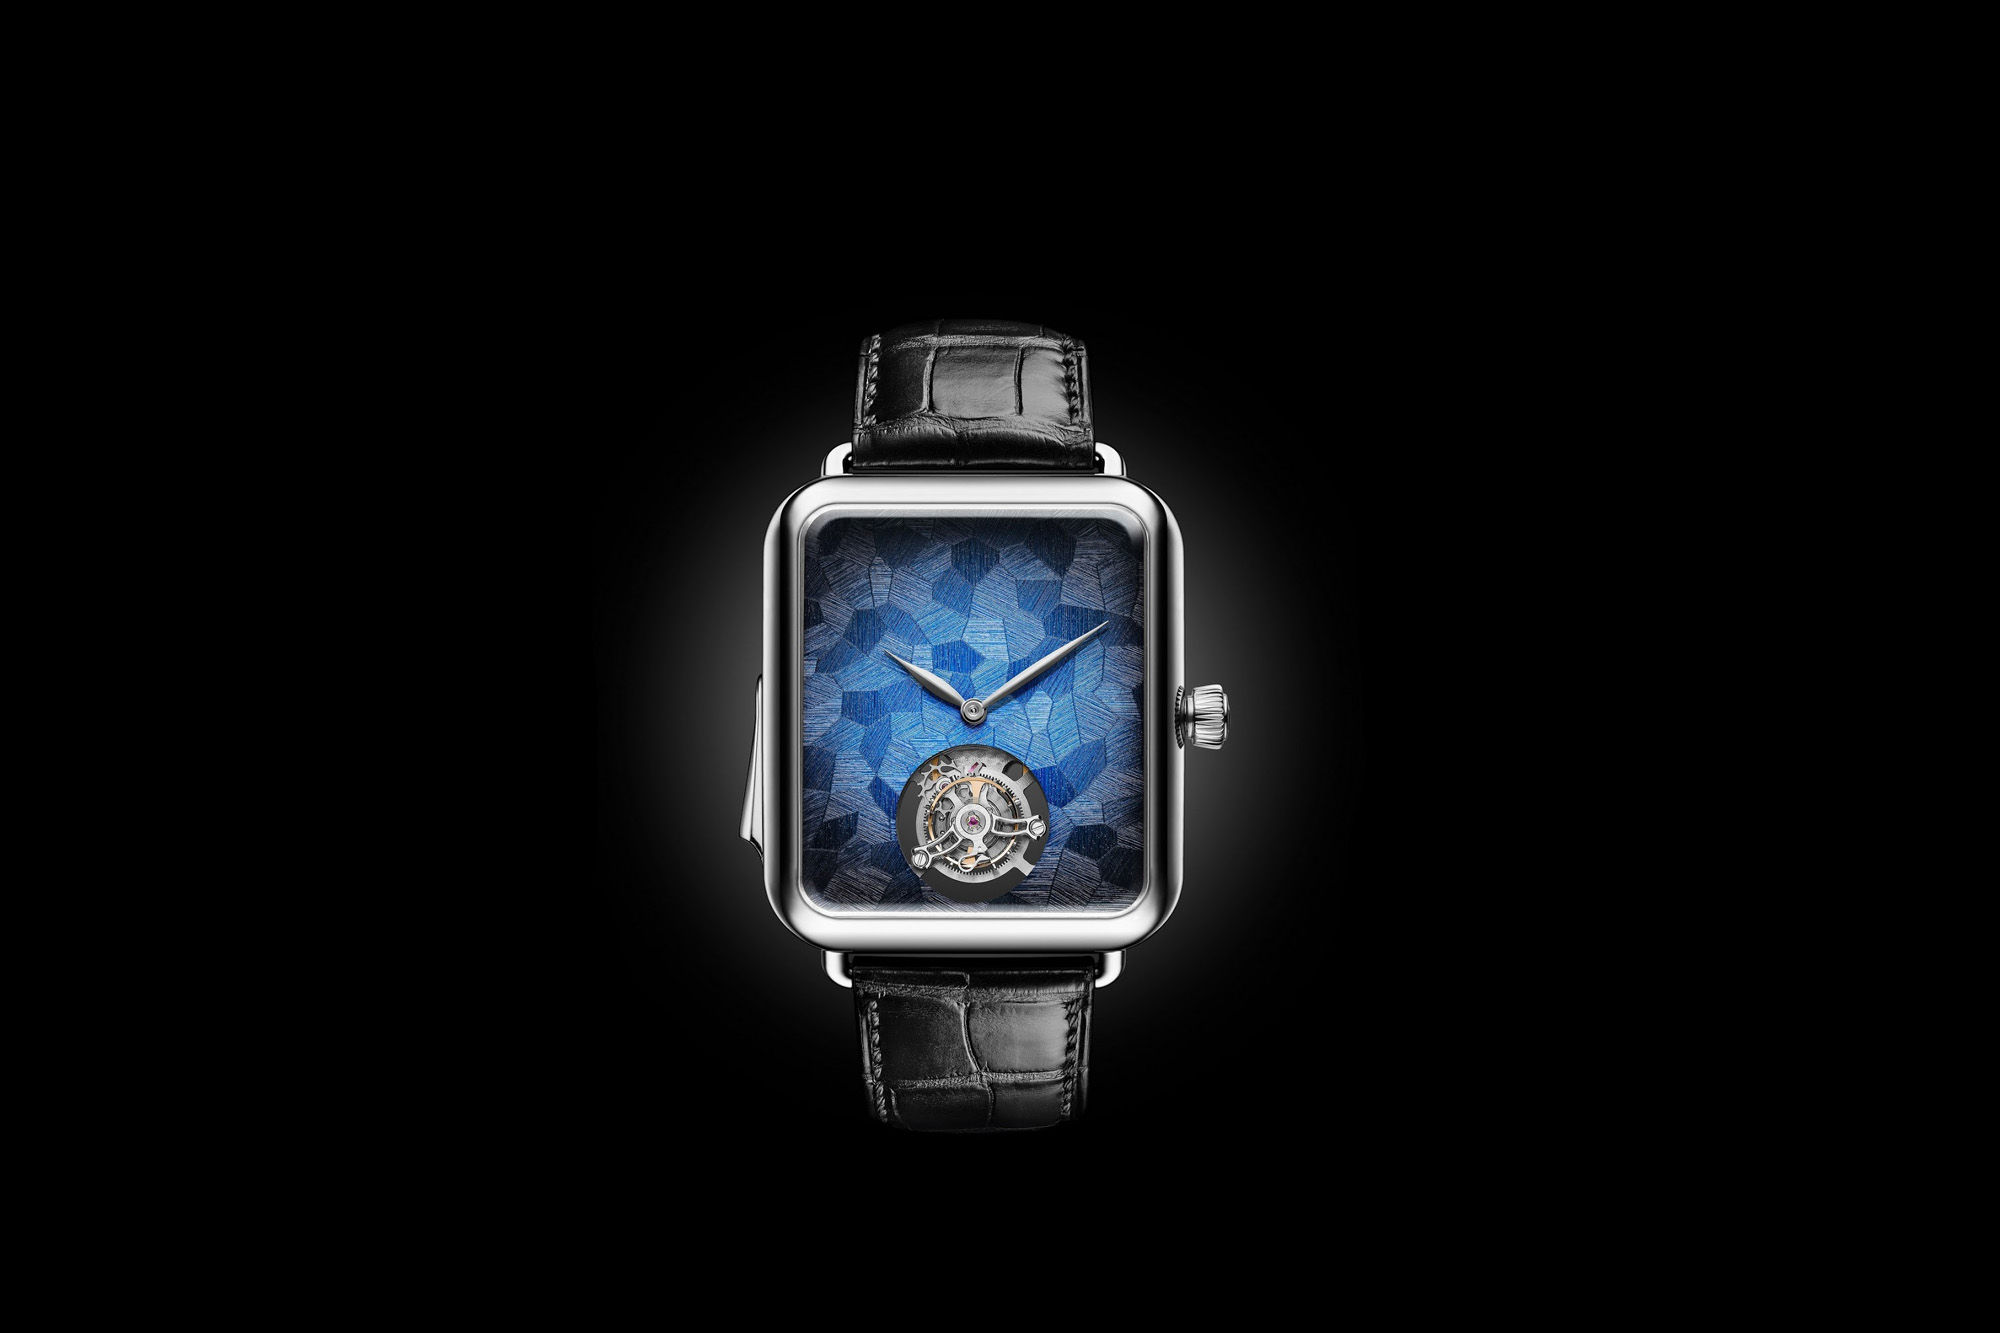 H. Moser & Cie updates the Swiss Alp Watch — a “smartwatch” that’s actually not so smart